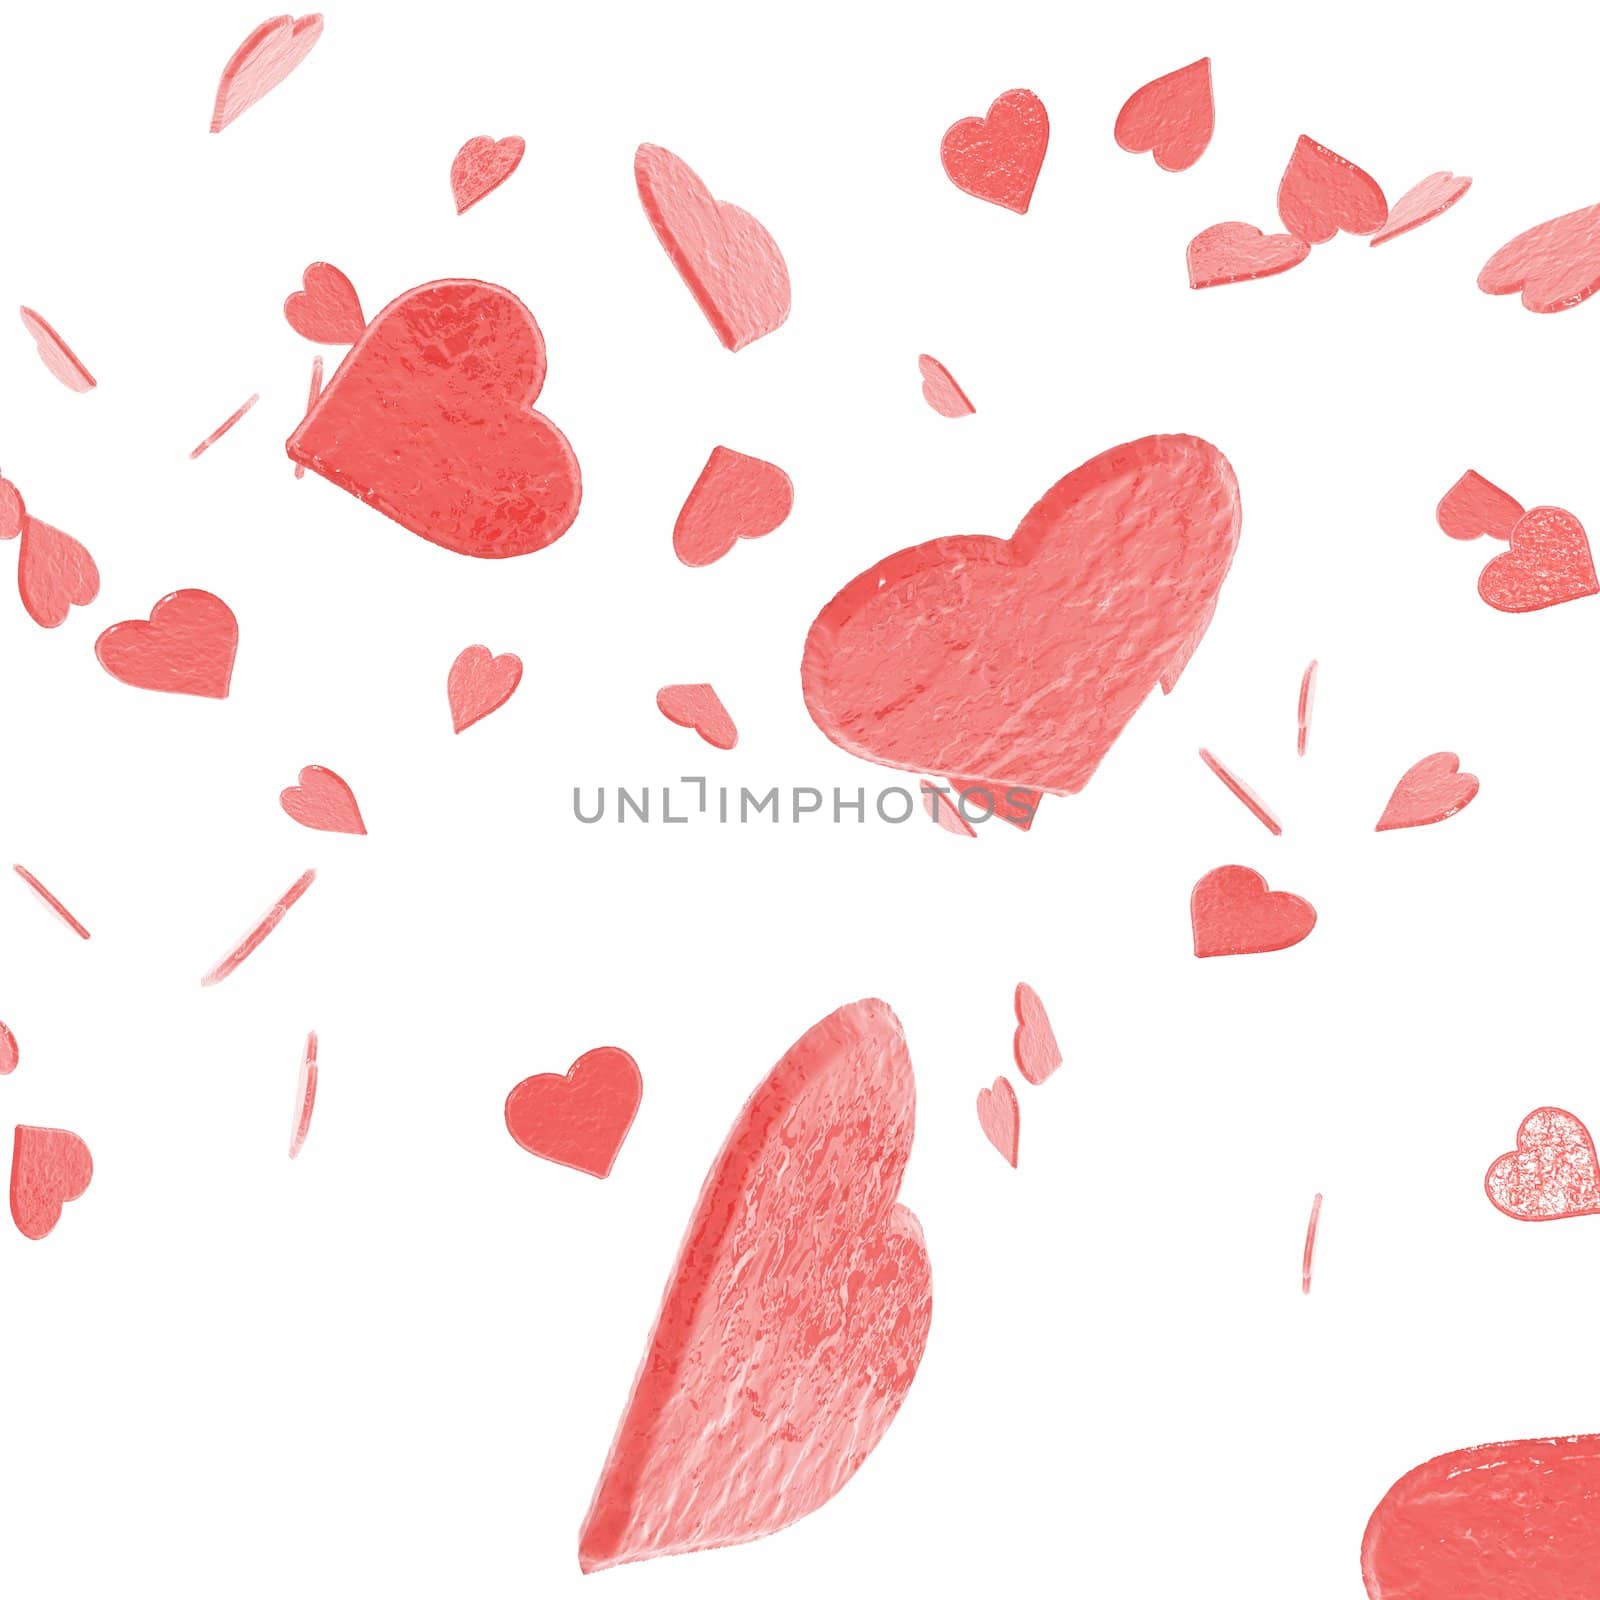 An illustration of St. Valentines confetti failing from the sky.